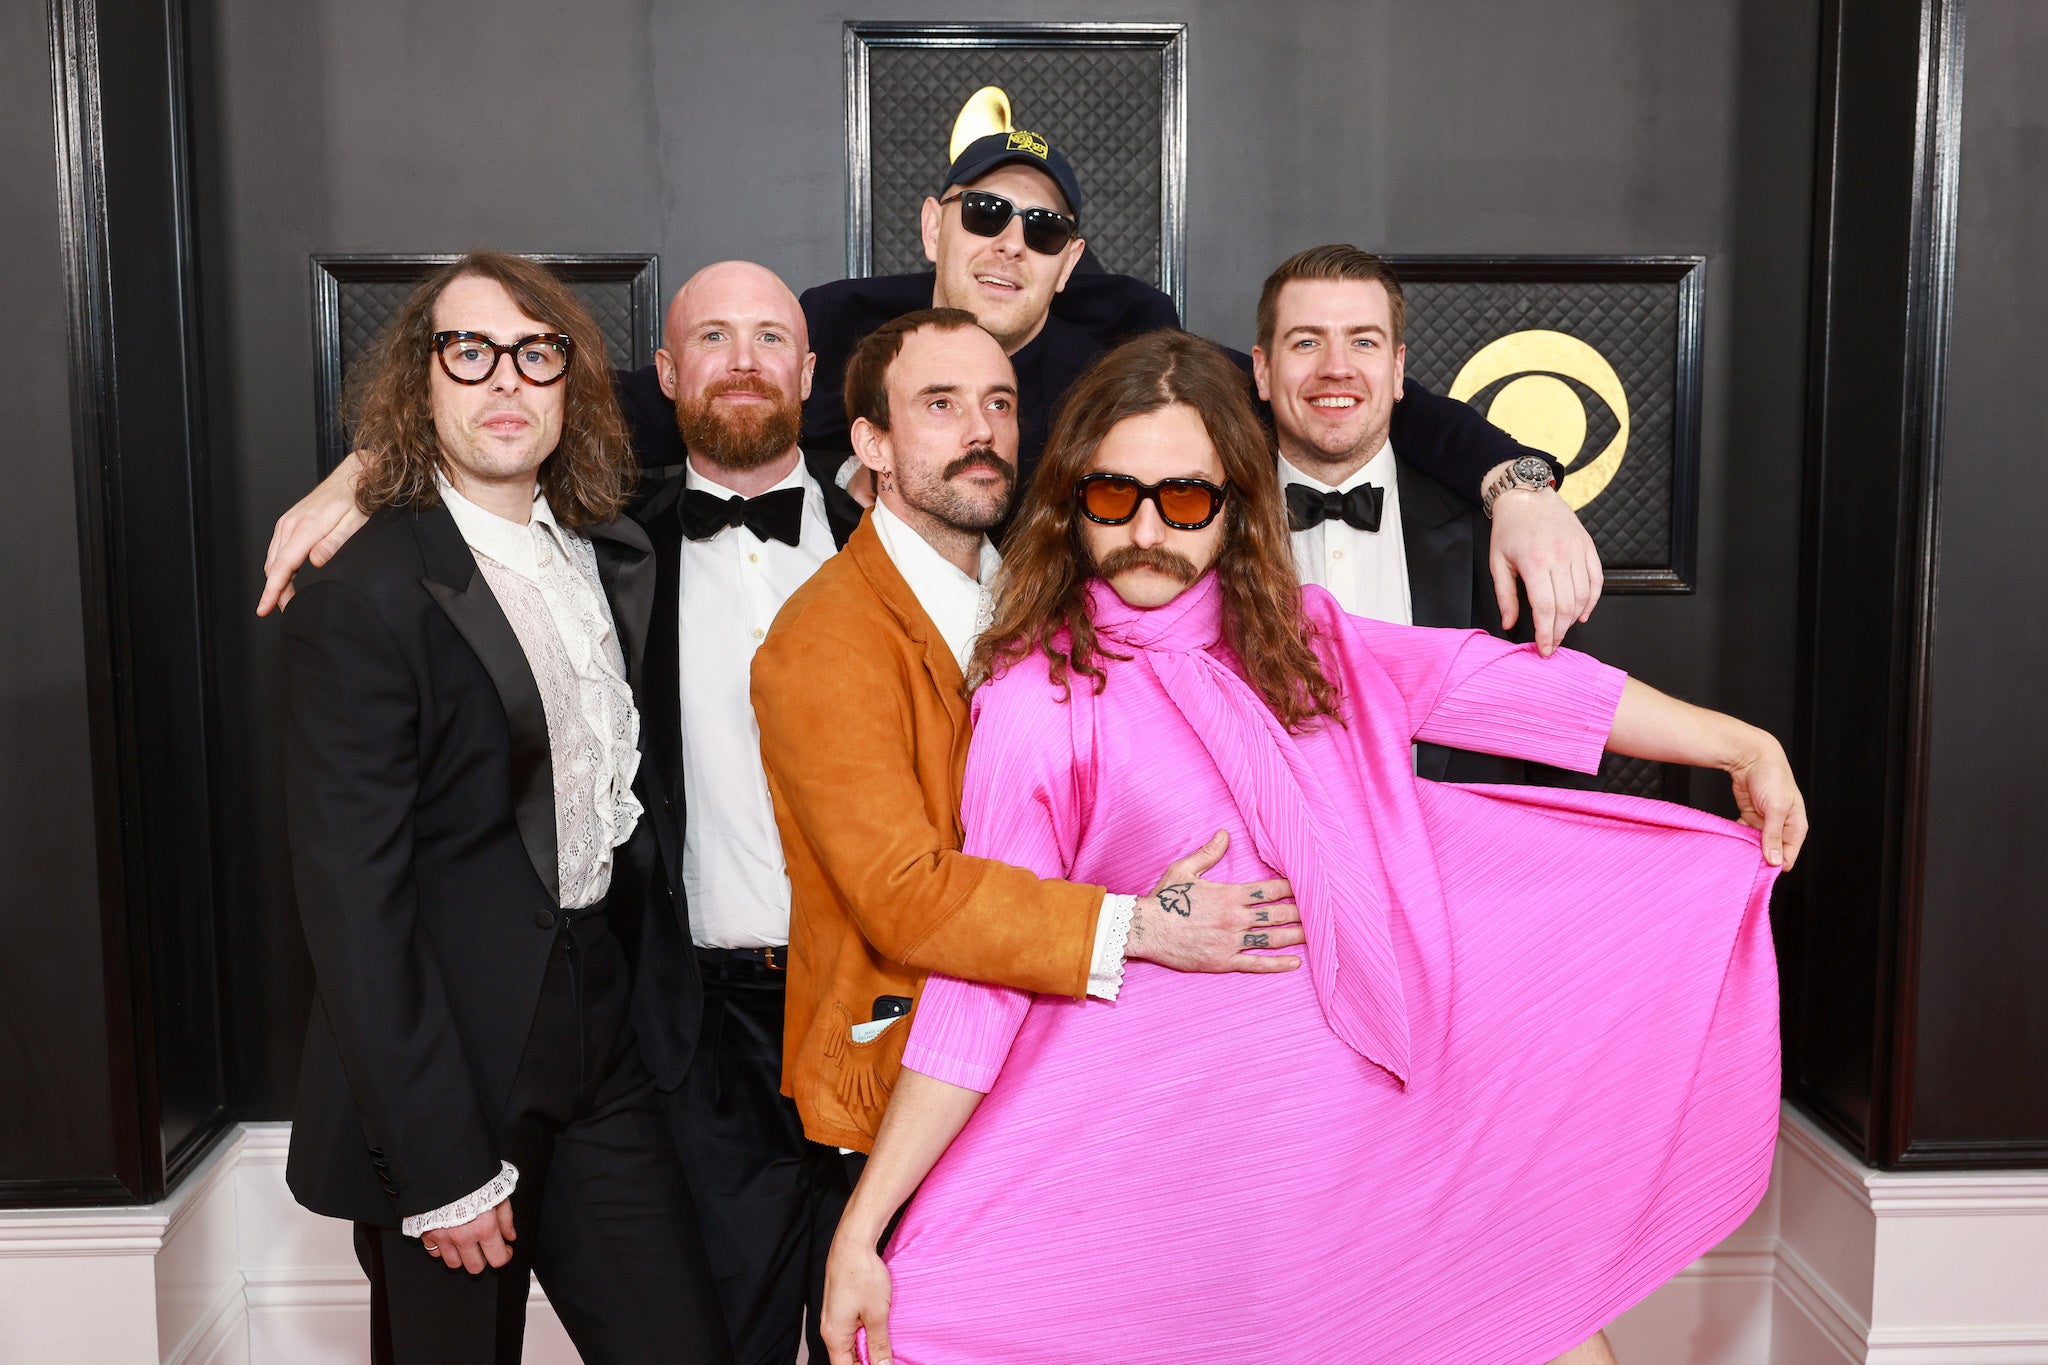 Idles strike a pose at the 2023 Grammy Awards in Los Angeles